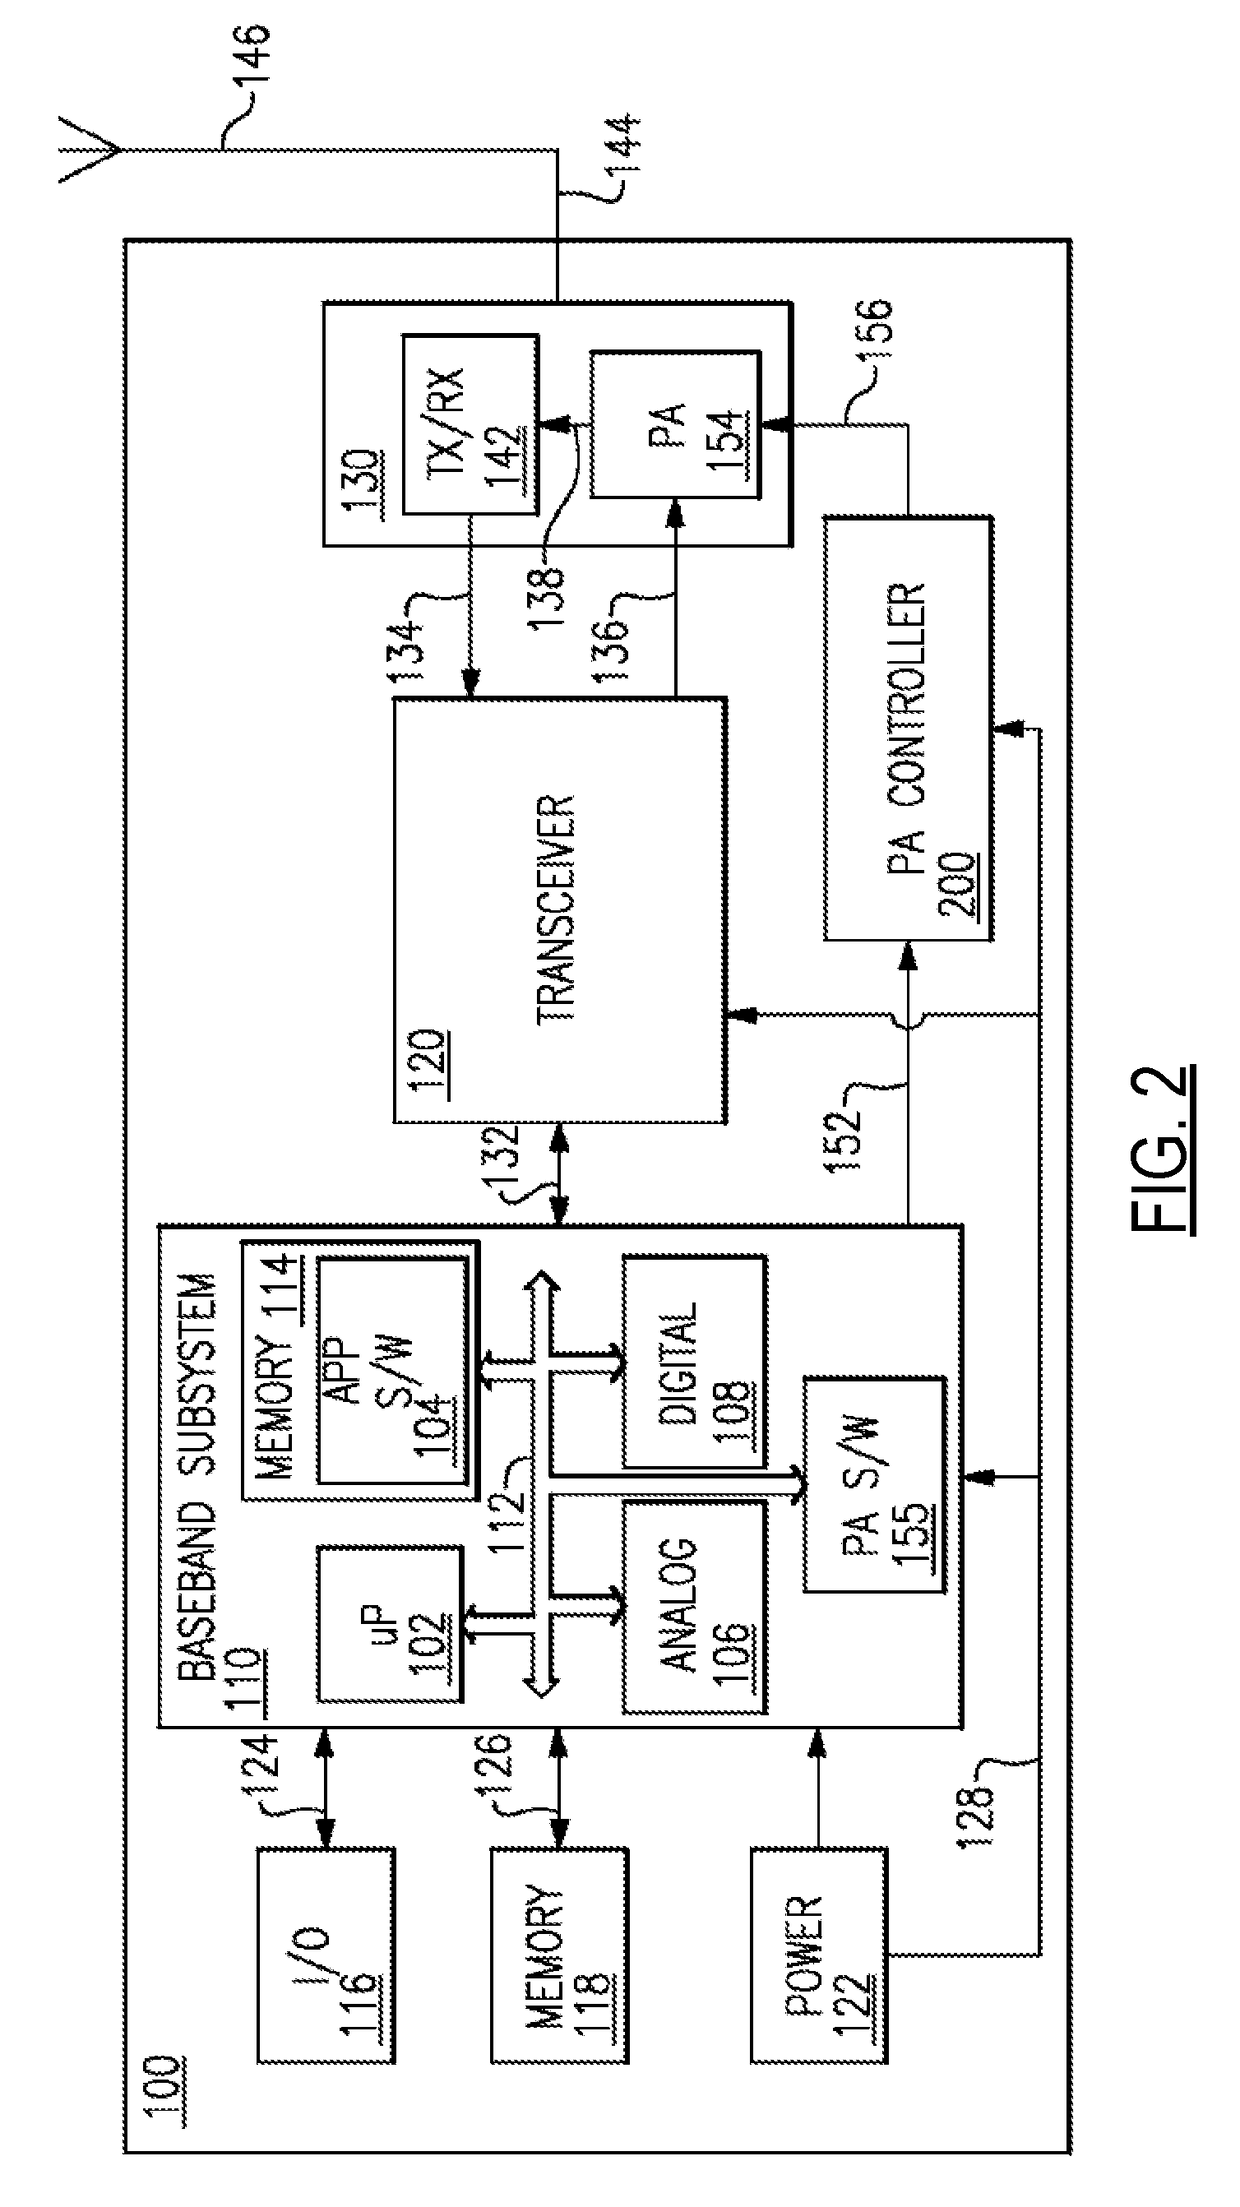 Circuits and methods for controlling power amplifiers